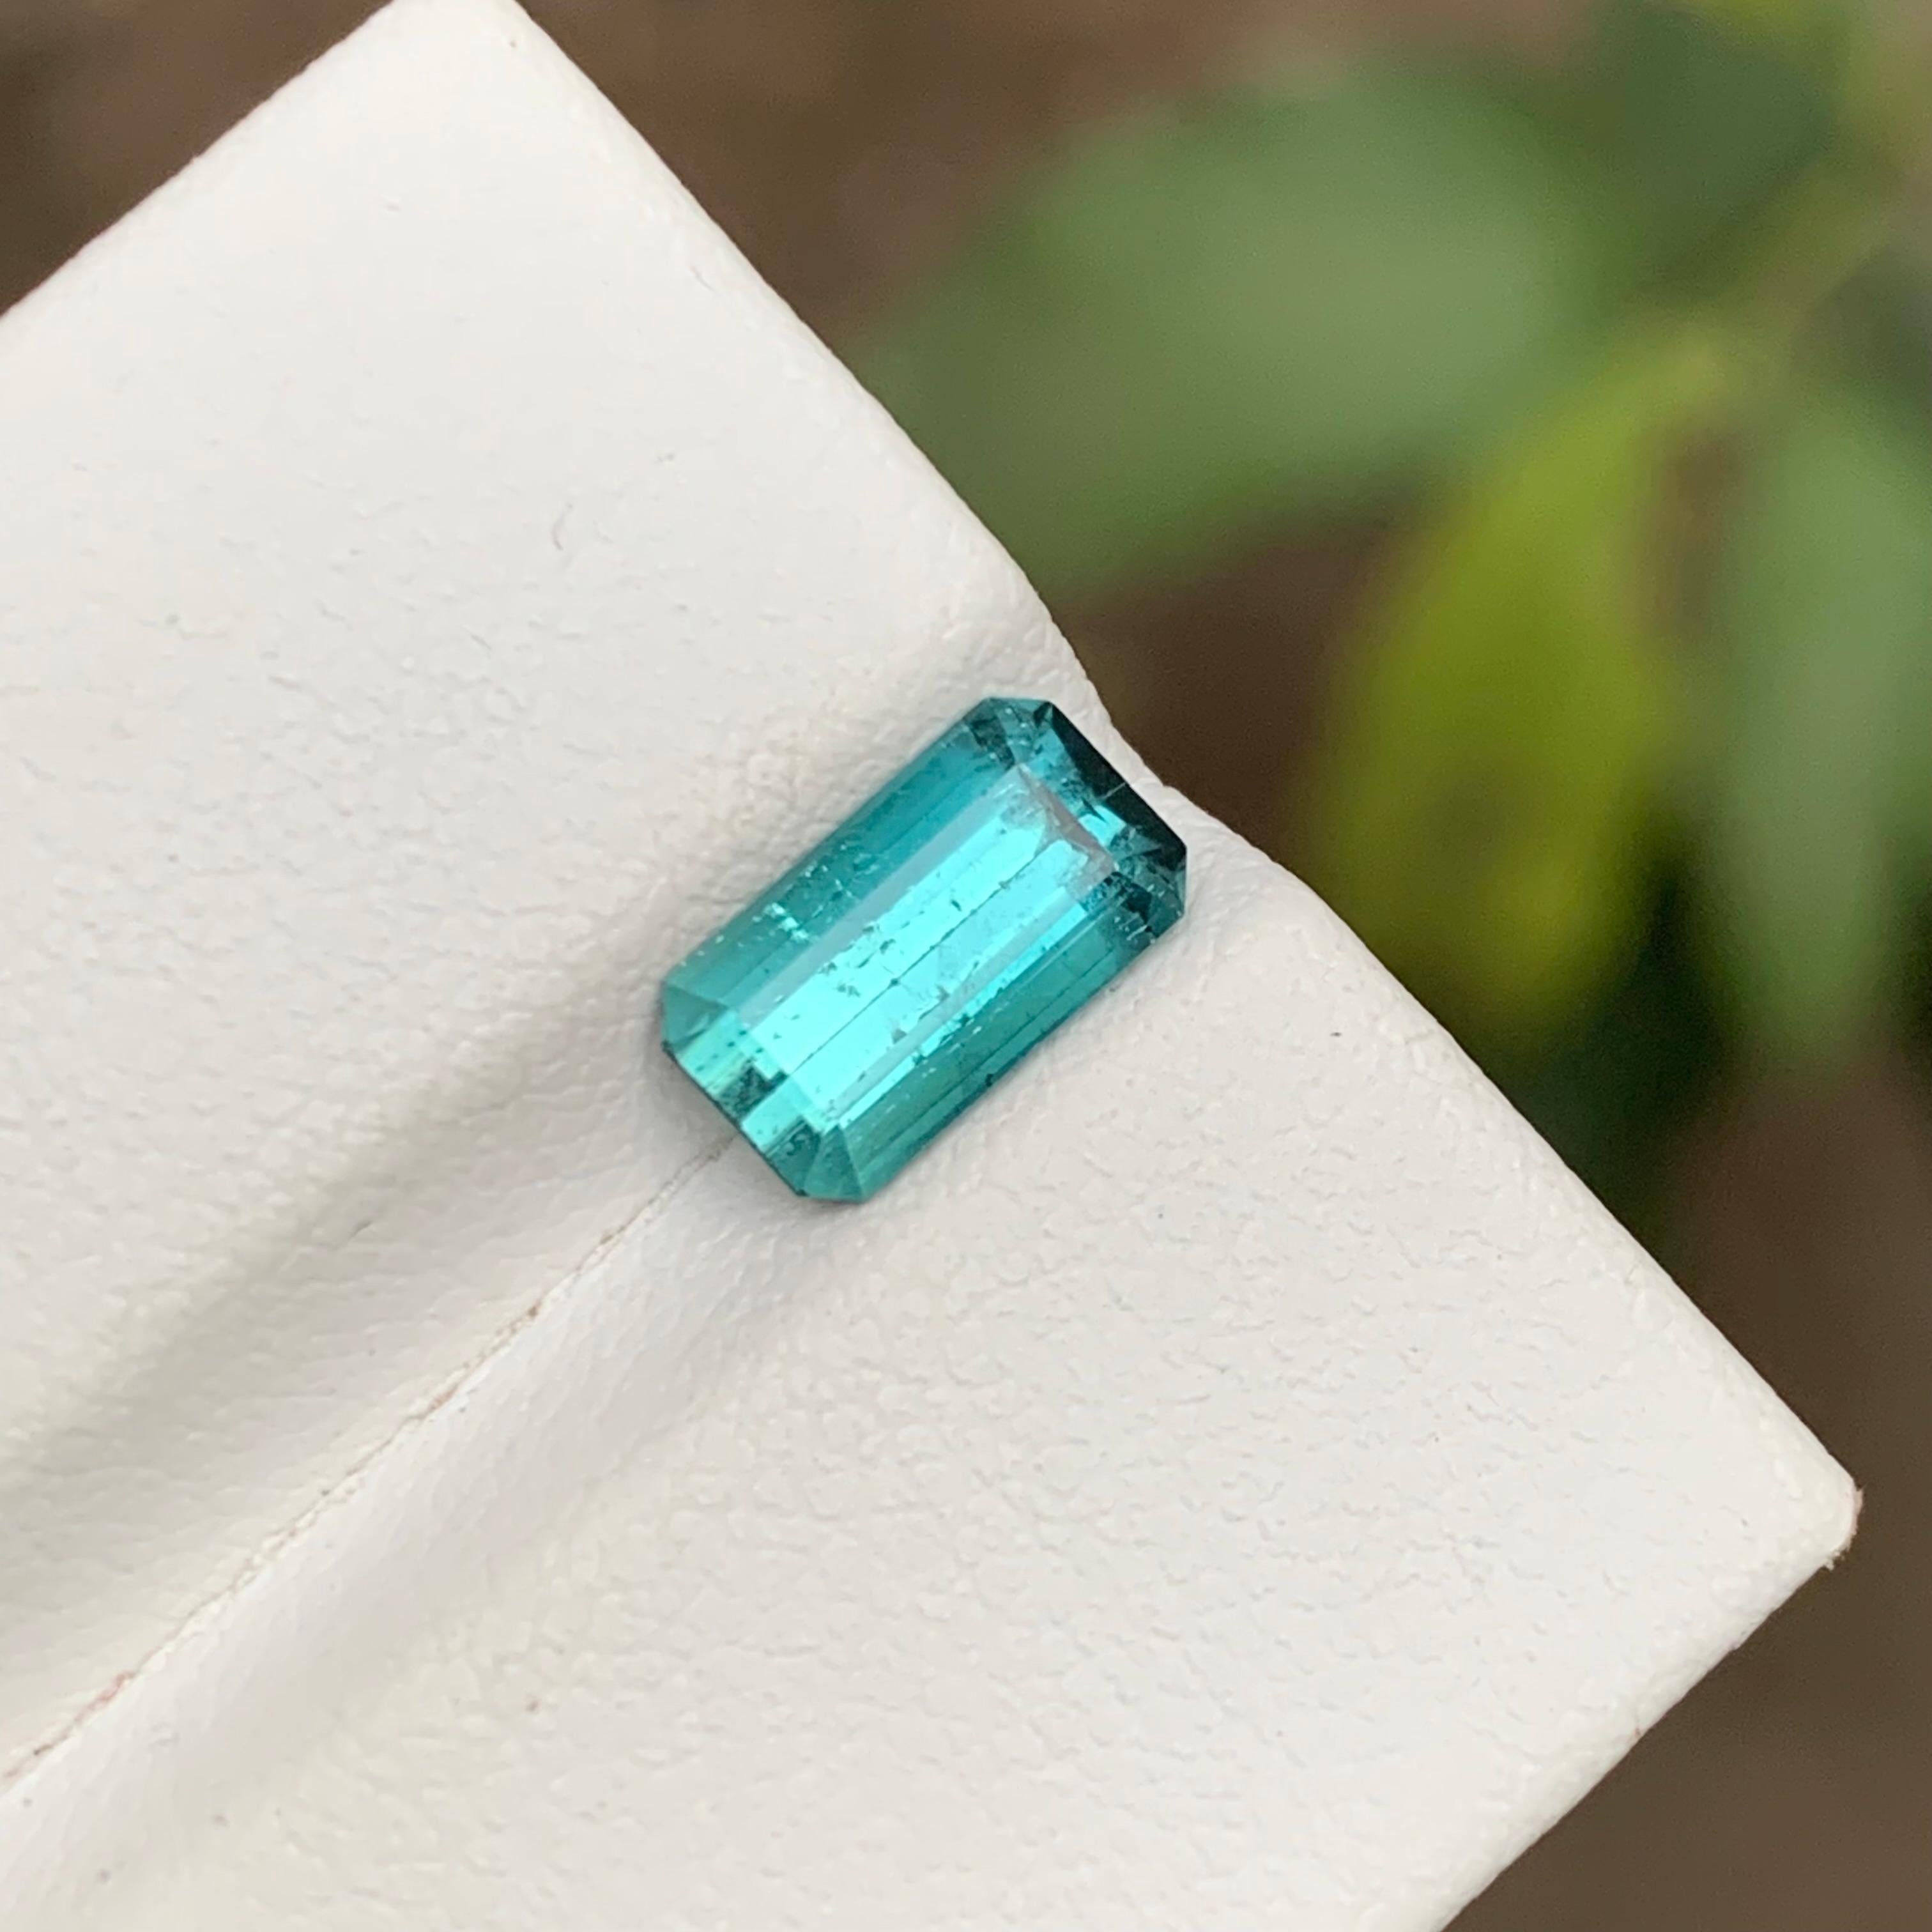 Rare Blue Natural Tourmaline Gemstone, 1.60 Ct Emerald Cut for Ring/Jewelry Set For Sale 1